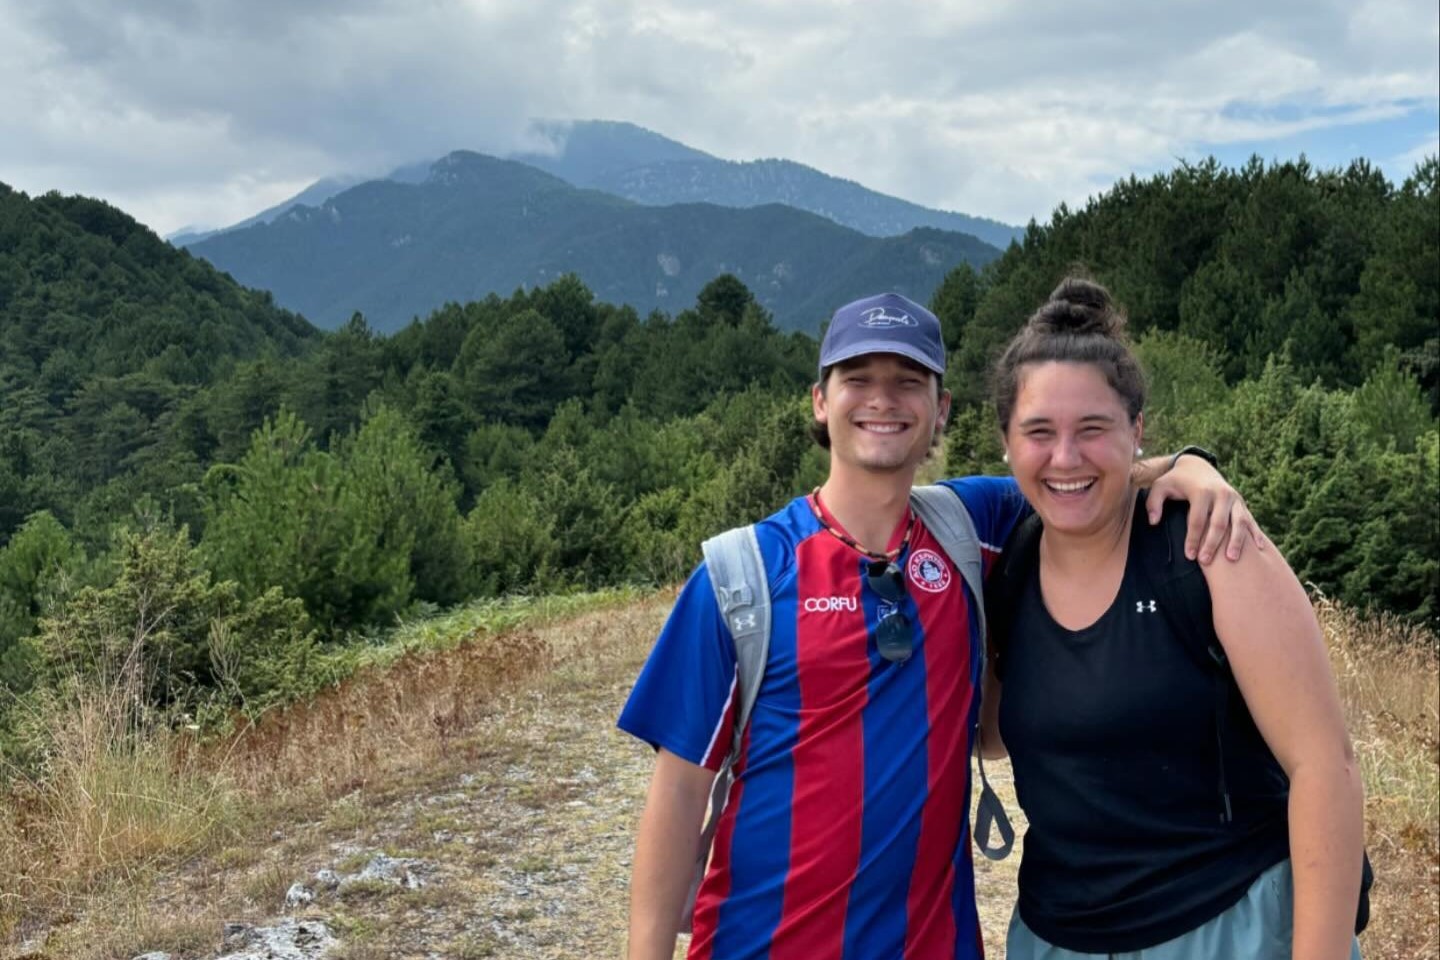 'Siblings pose for photo on trail with mountains in the background.'